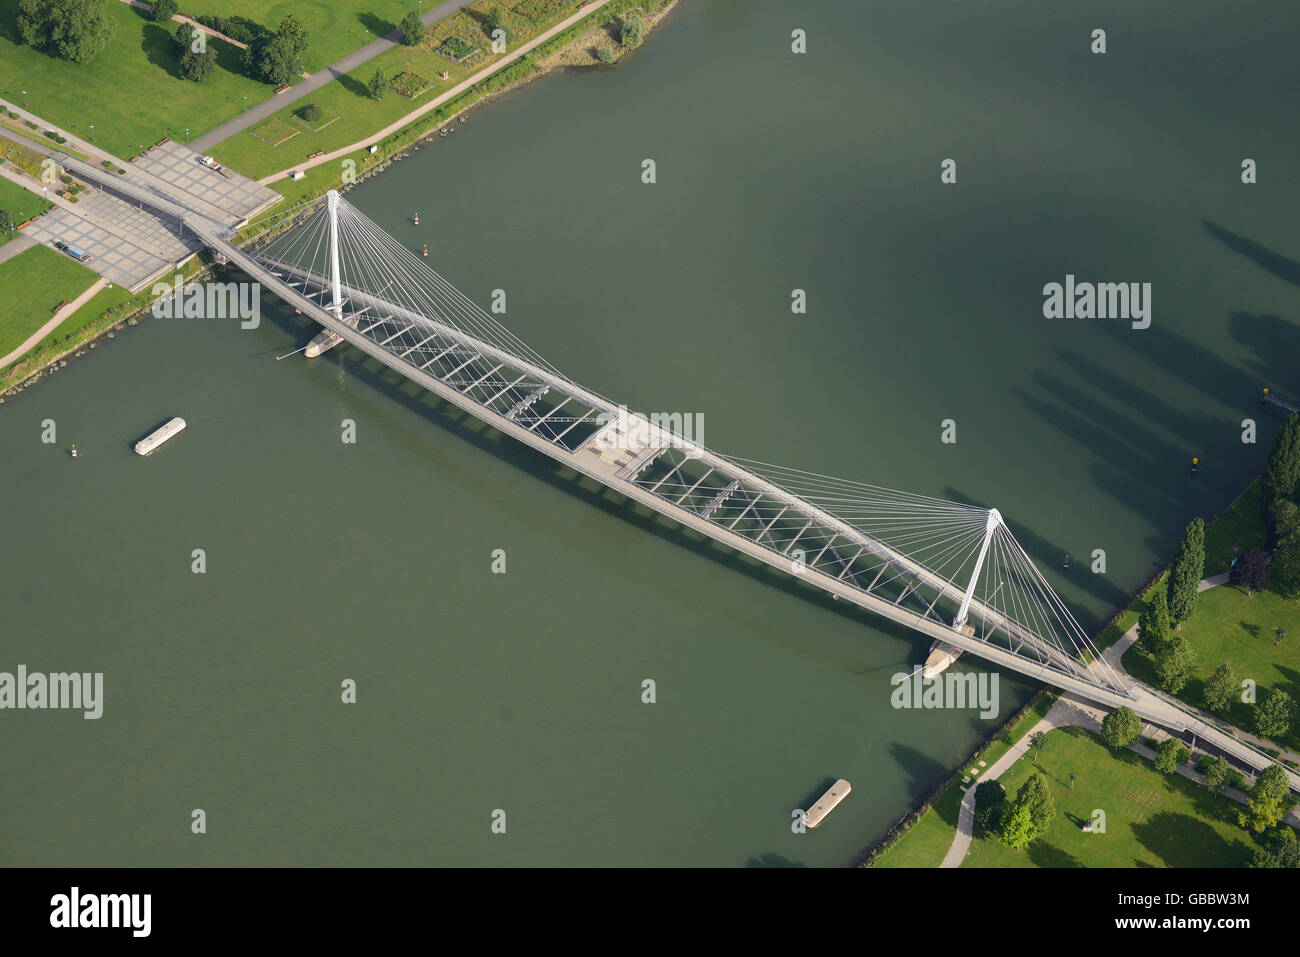 AERIAL VIEW. Passerelle des Deux Rives aka Passerelle Mimram. Cable-stayed footbridge over the Rhine linking Strasbourg in France and Kehl in Germany. Stock Photo